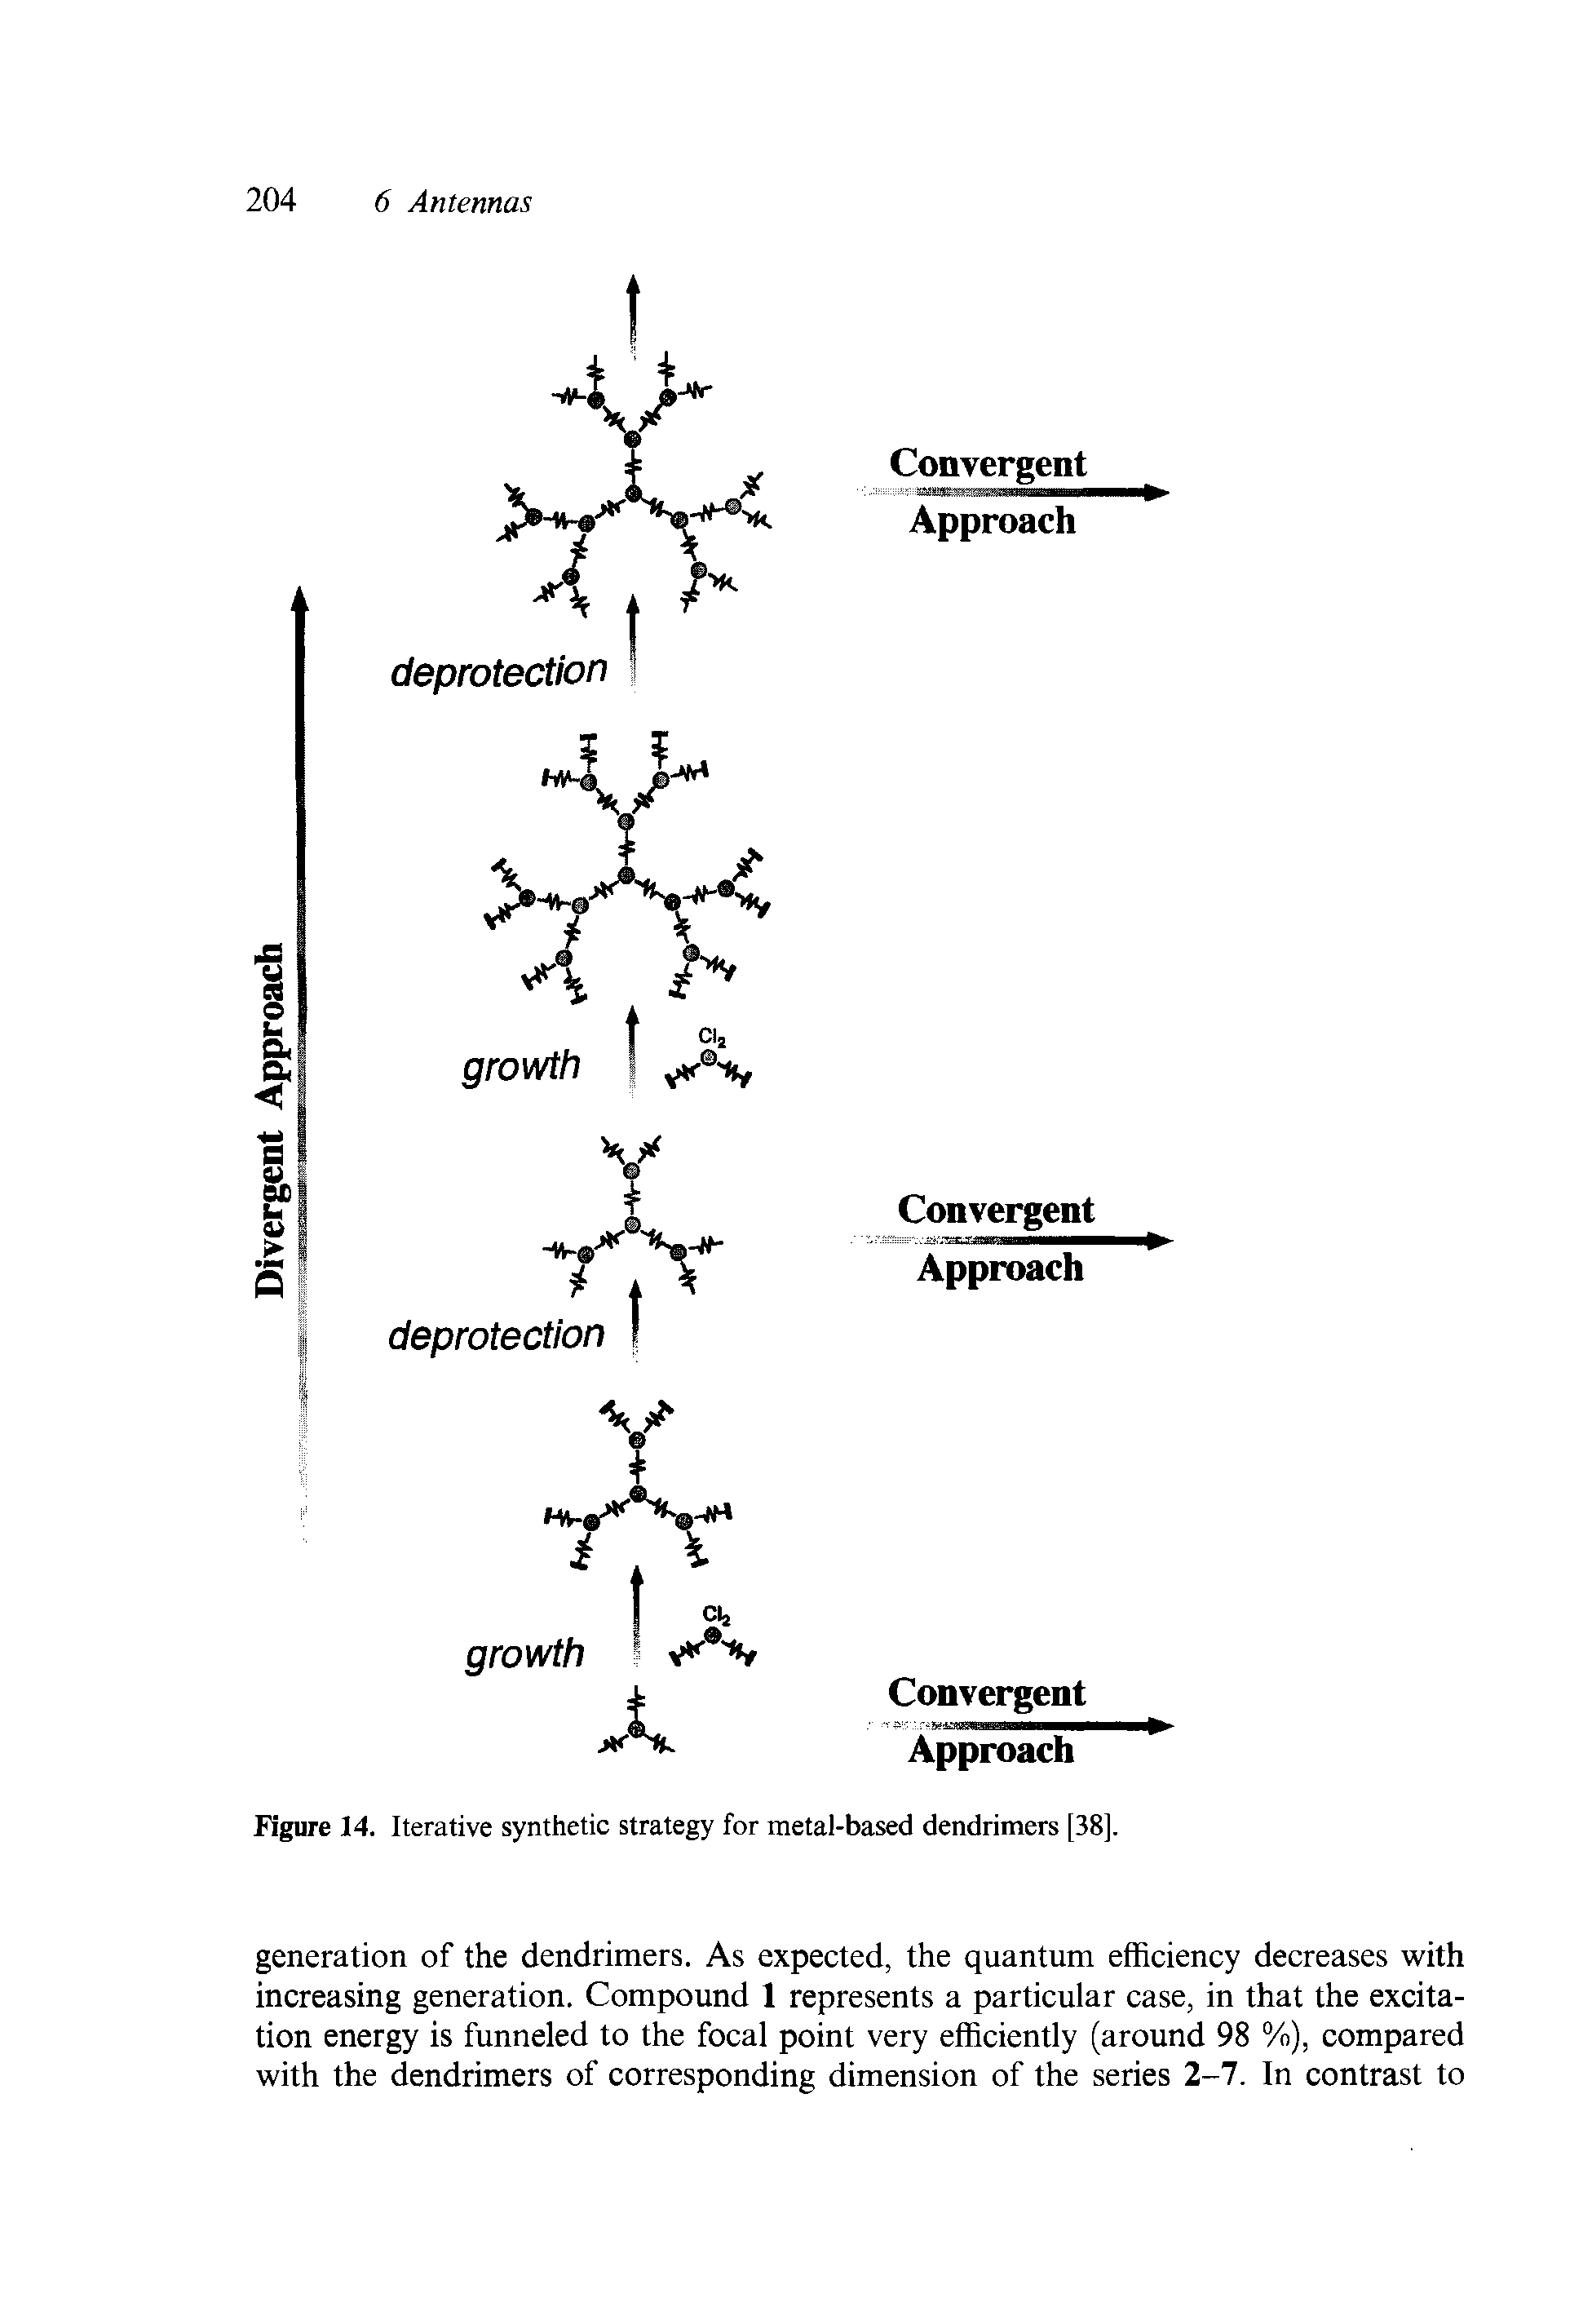 Figure 14. Iterative synthetic strategy for metal-based dendrimers [38].